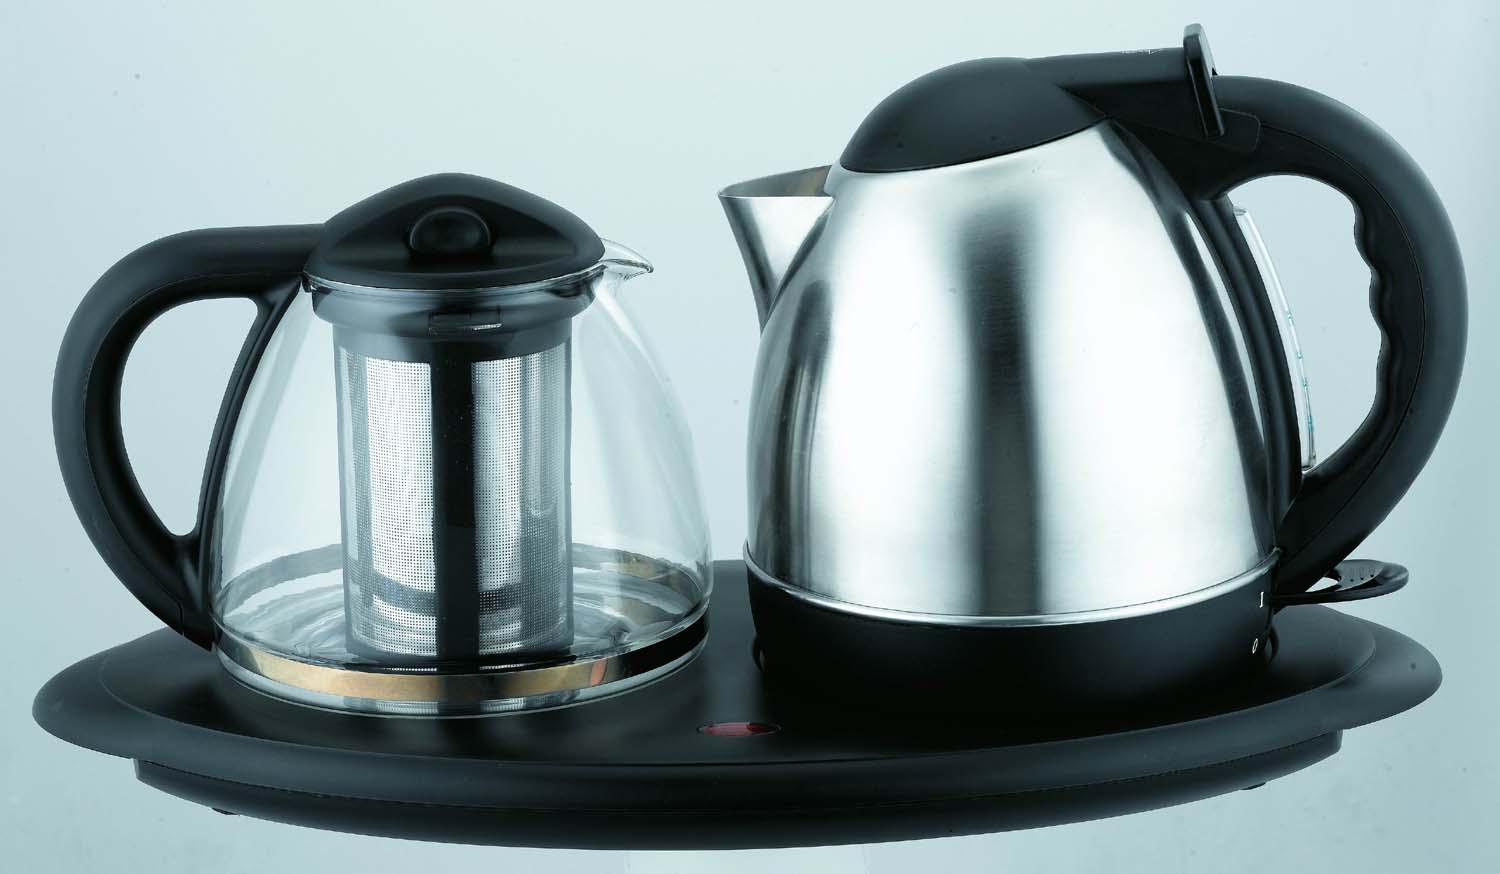 Family Electric Kettle /10.2$